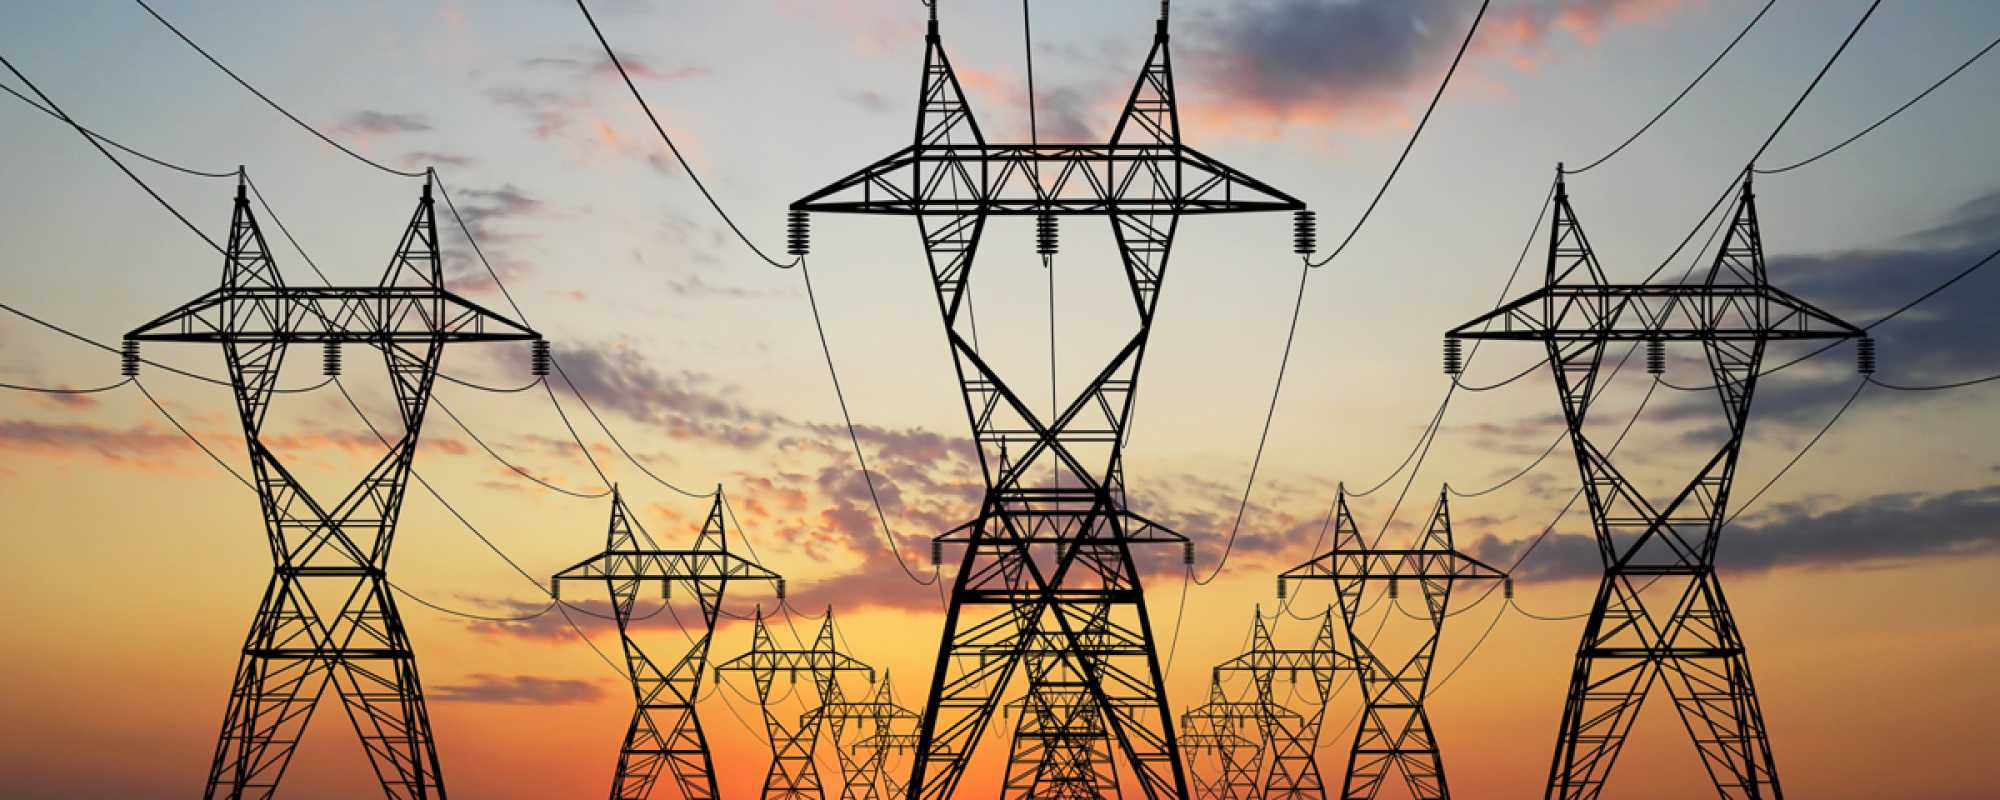 will national grid leave RI?